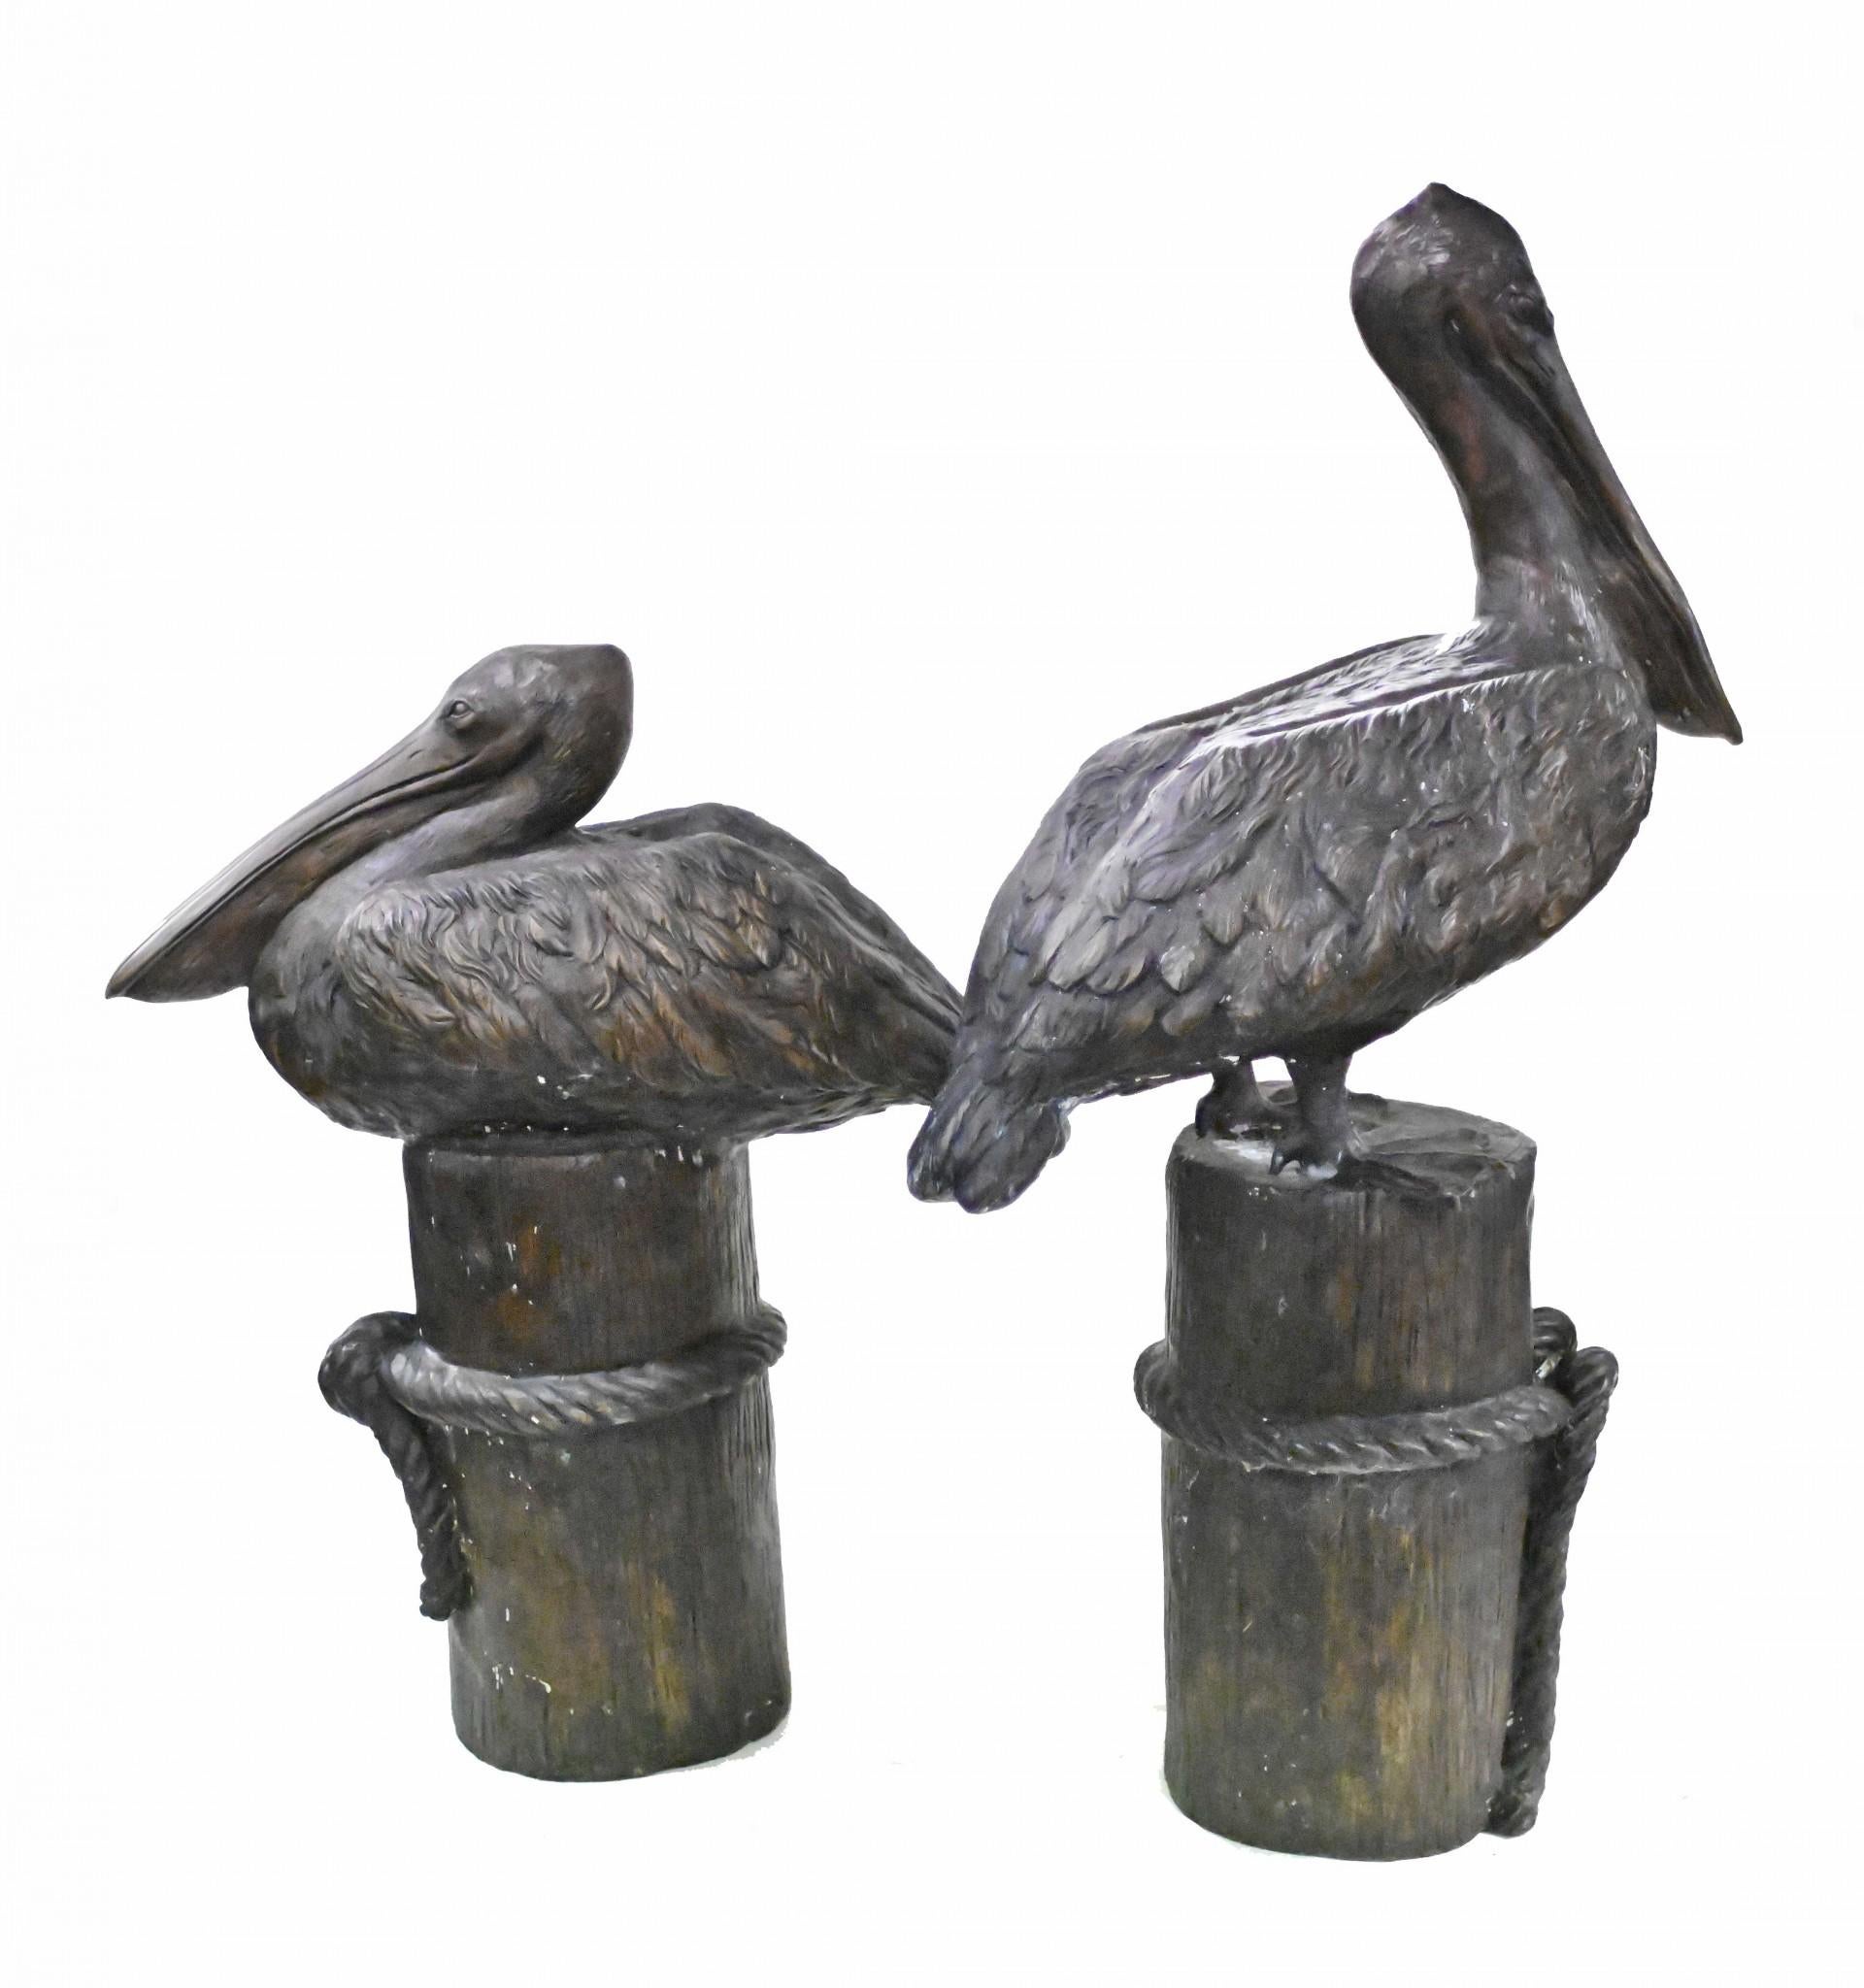 Wonderful pair of giant bronze pelicans standing on boat mooring stumps
Classic Pacific sea bird, very Californian
Of course being bronze these can live outside with no fear of rusting
Offered in great condition, ready for home use right